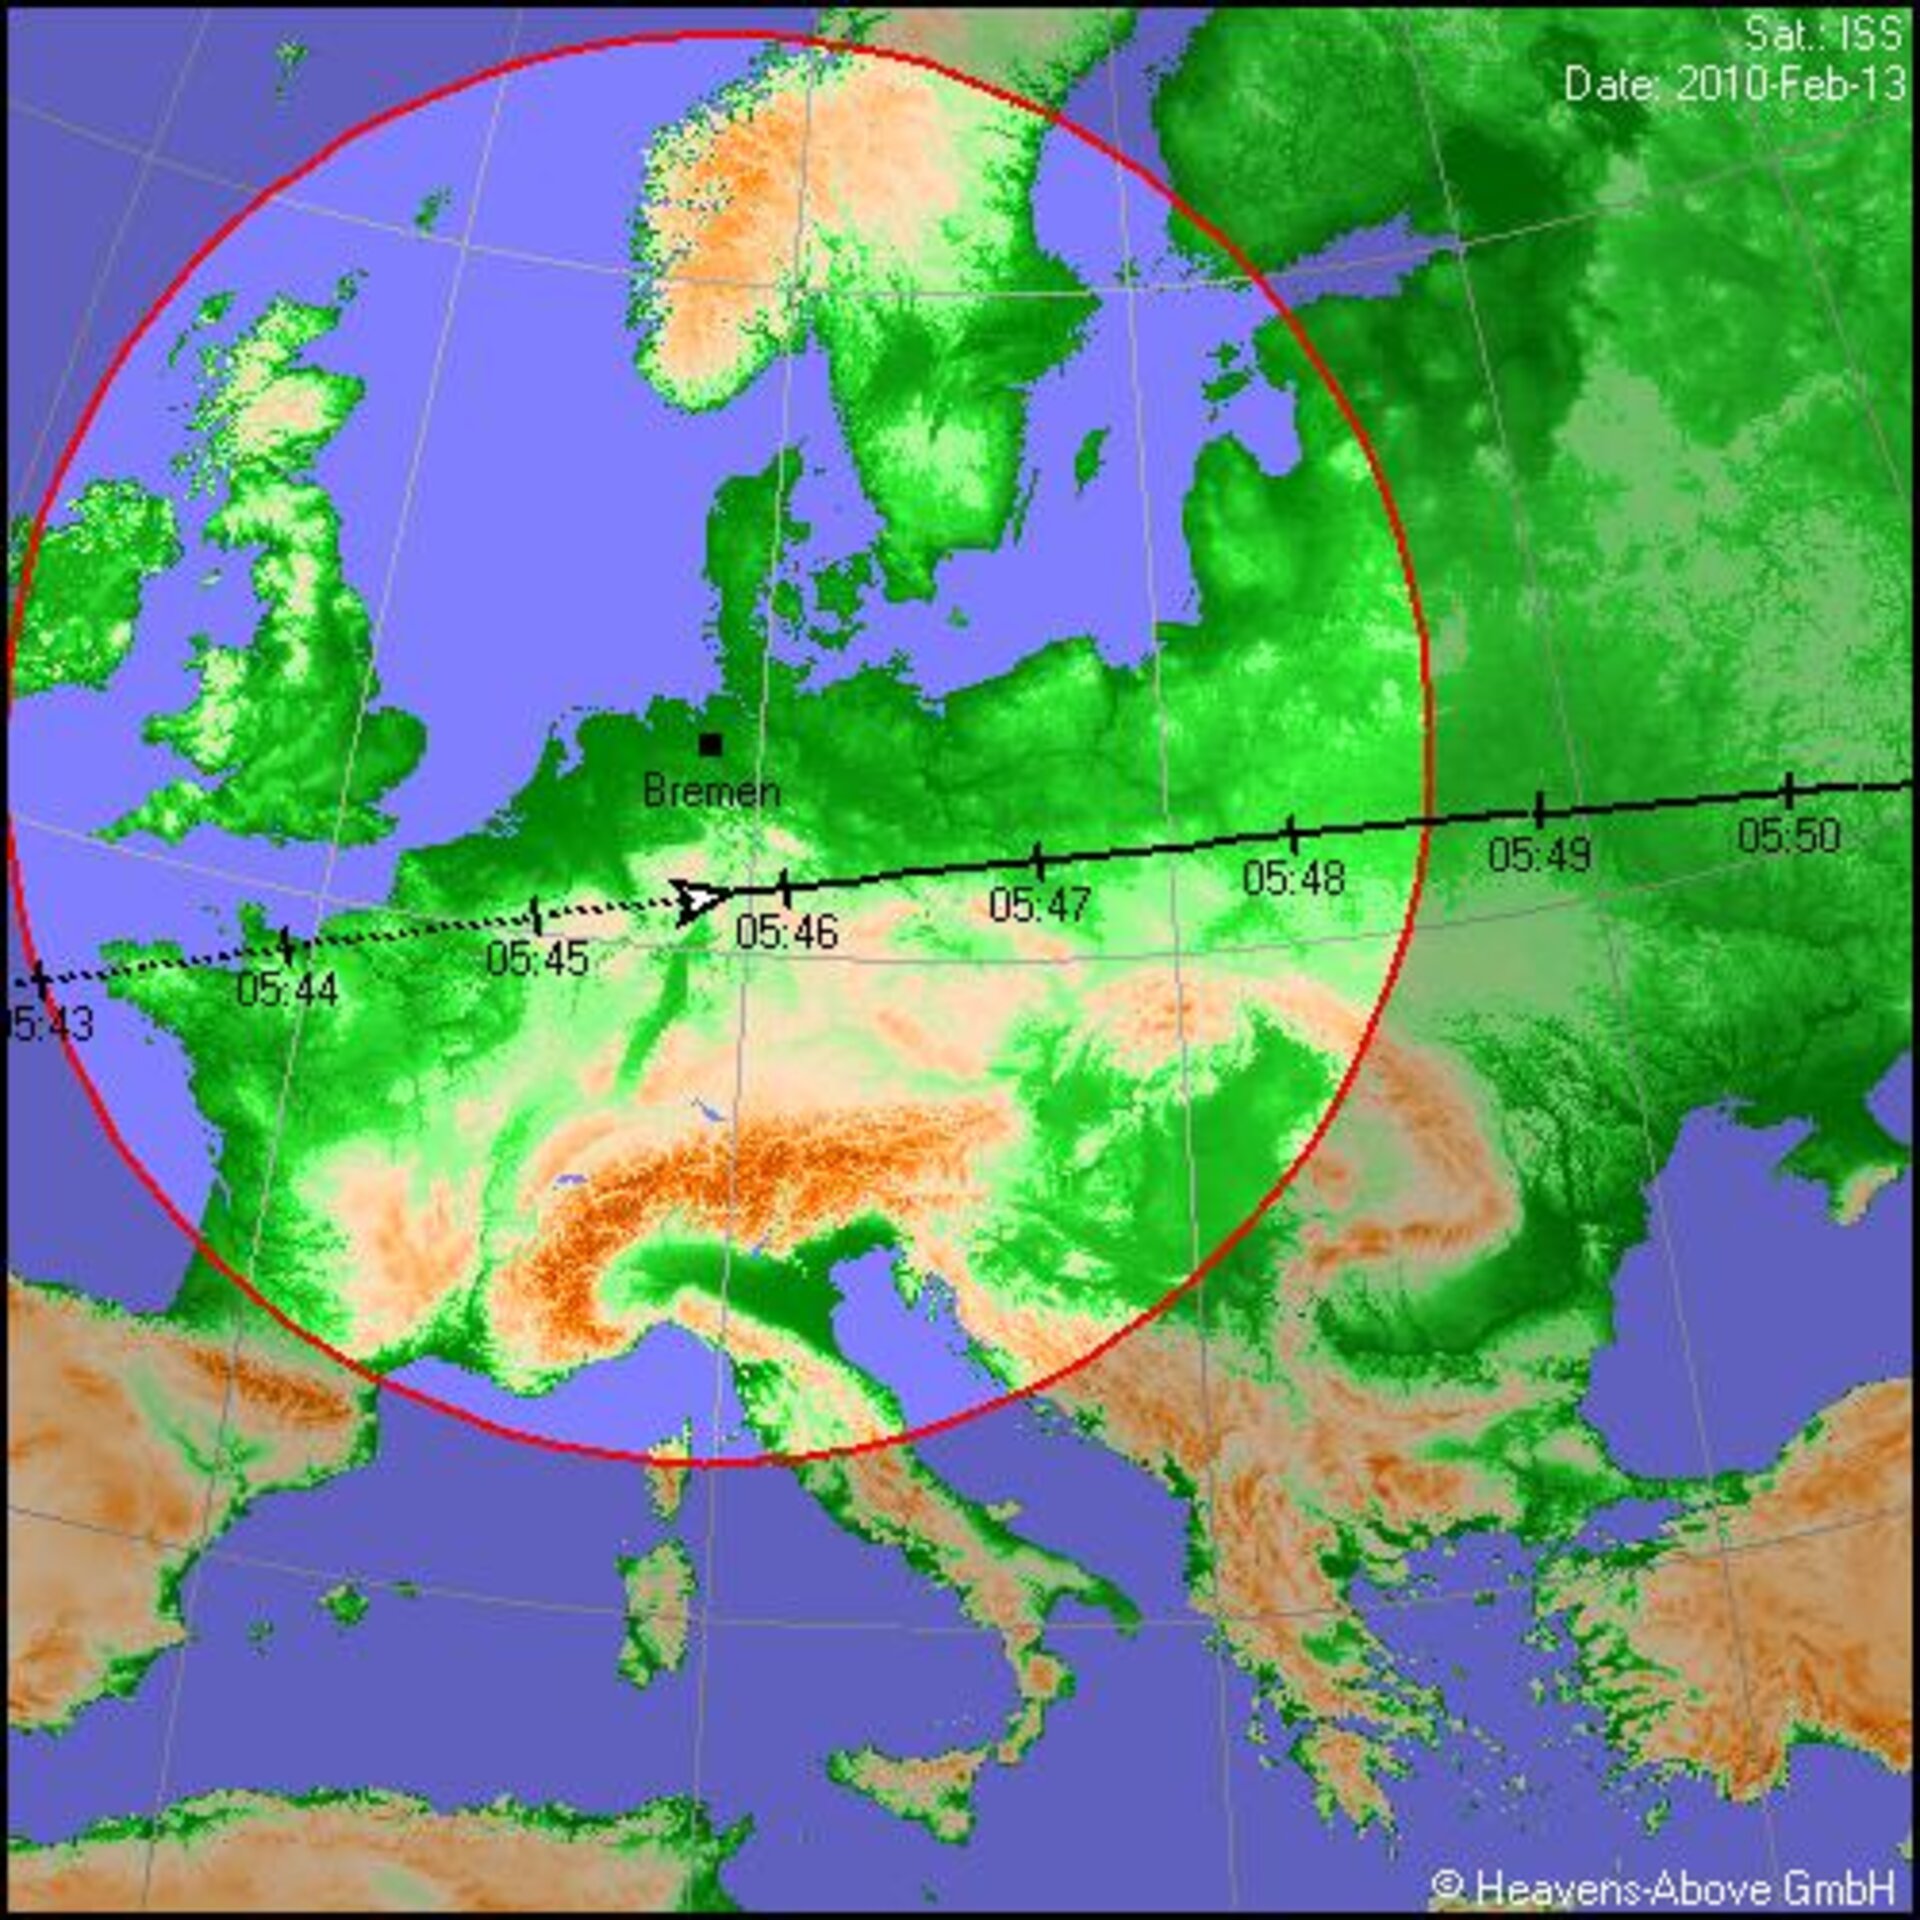 ISS passing central Europe on 13 February